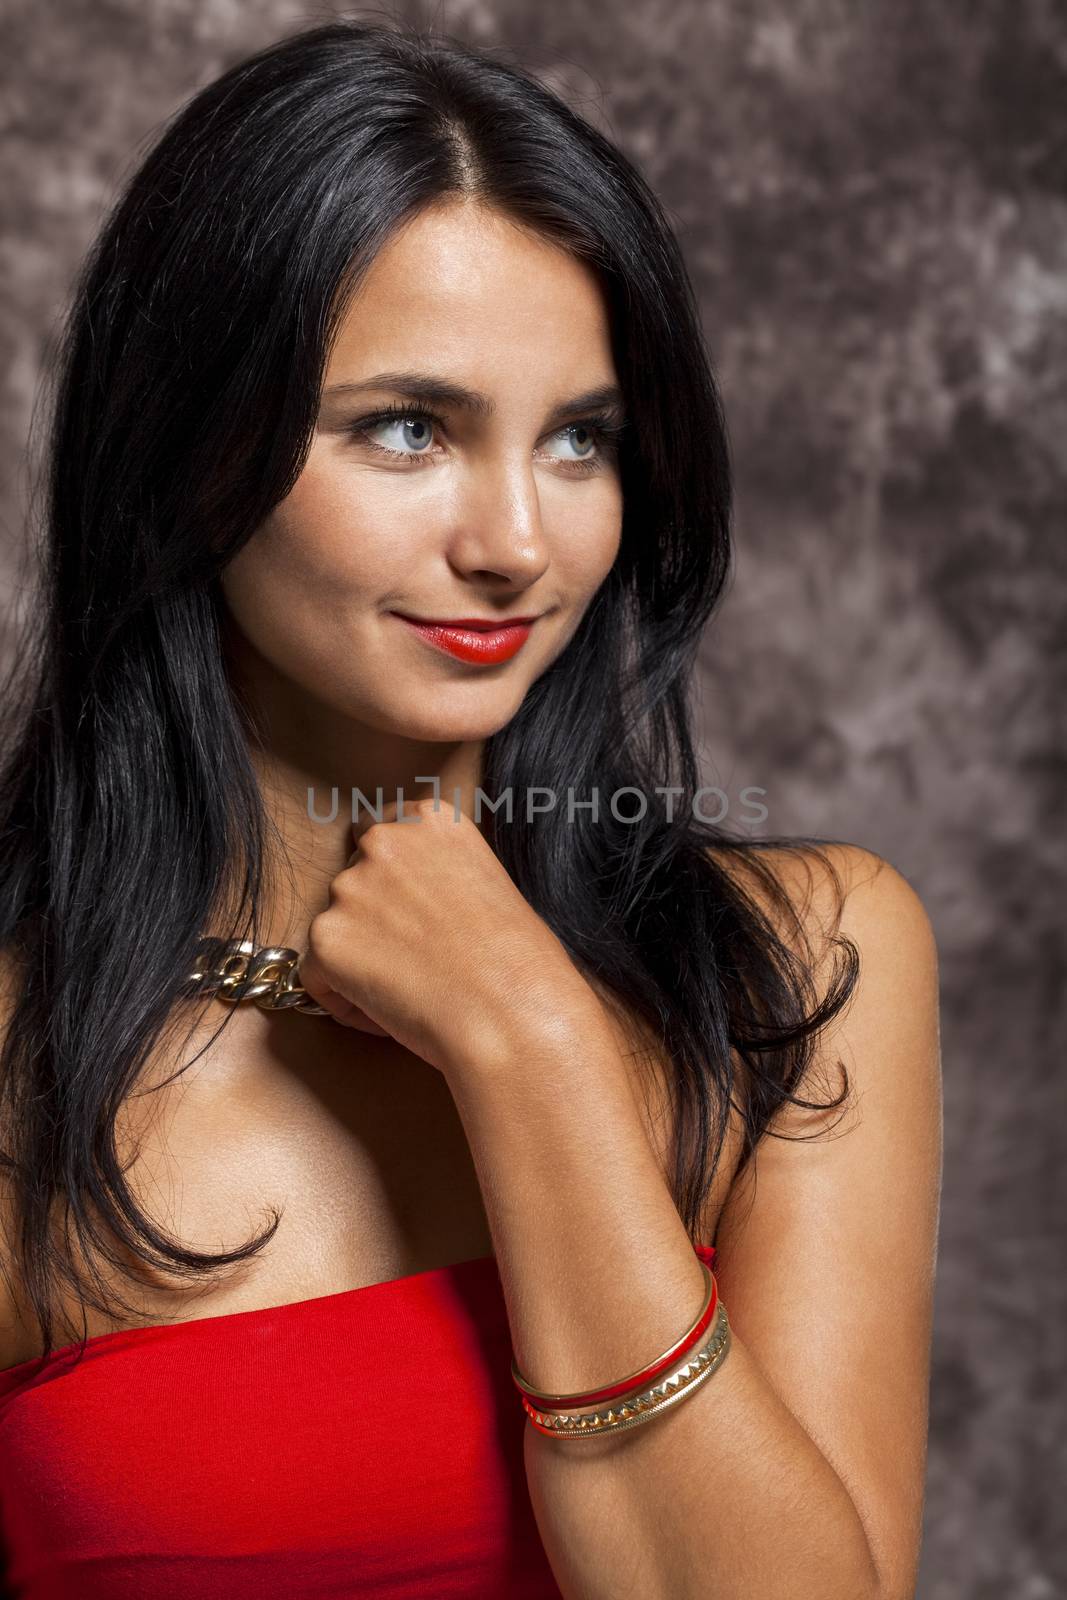 Close up Pretty Young Woman with long Black Hair, Wearing Red. Looking at Right Frame. Captured with Abstract Brown Background.